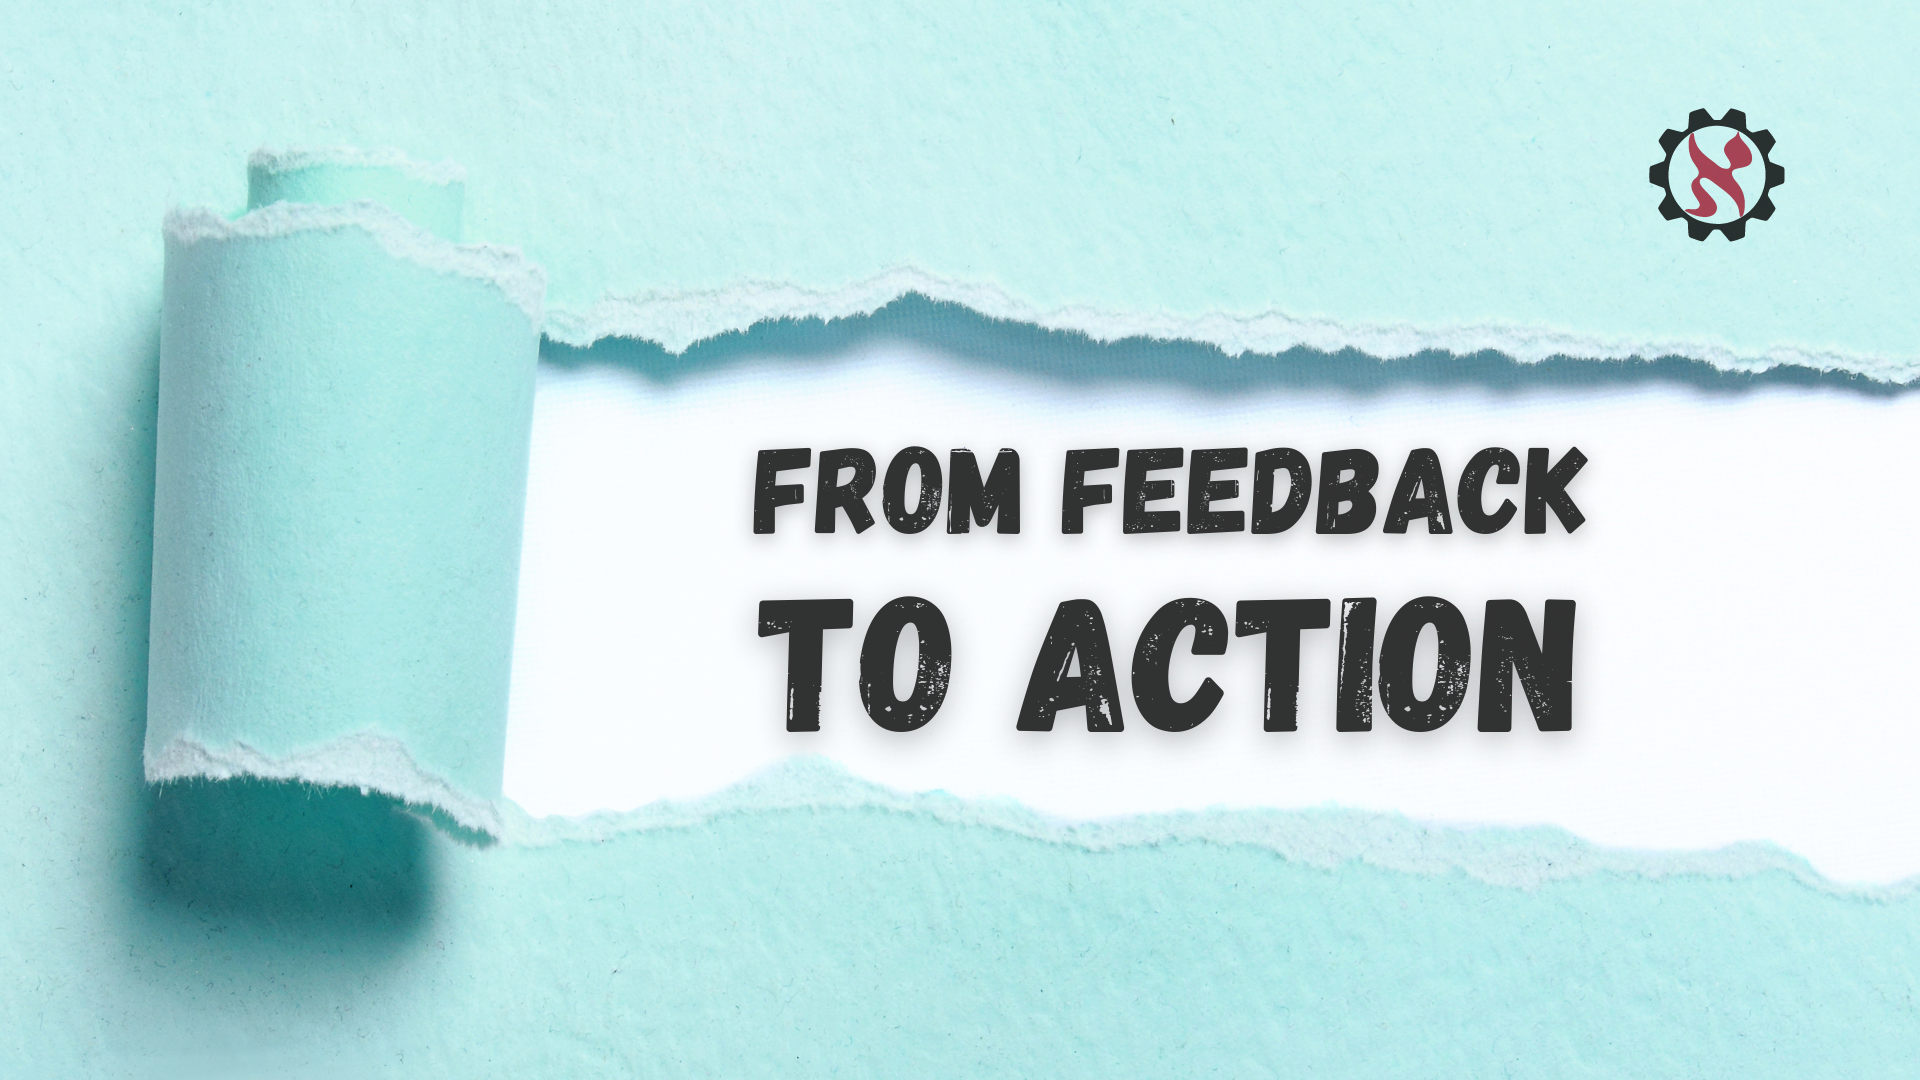 from feedback to action